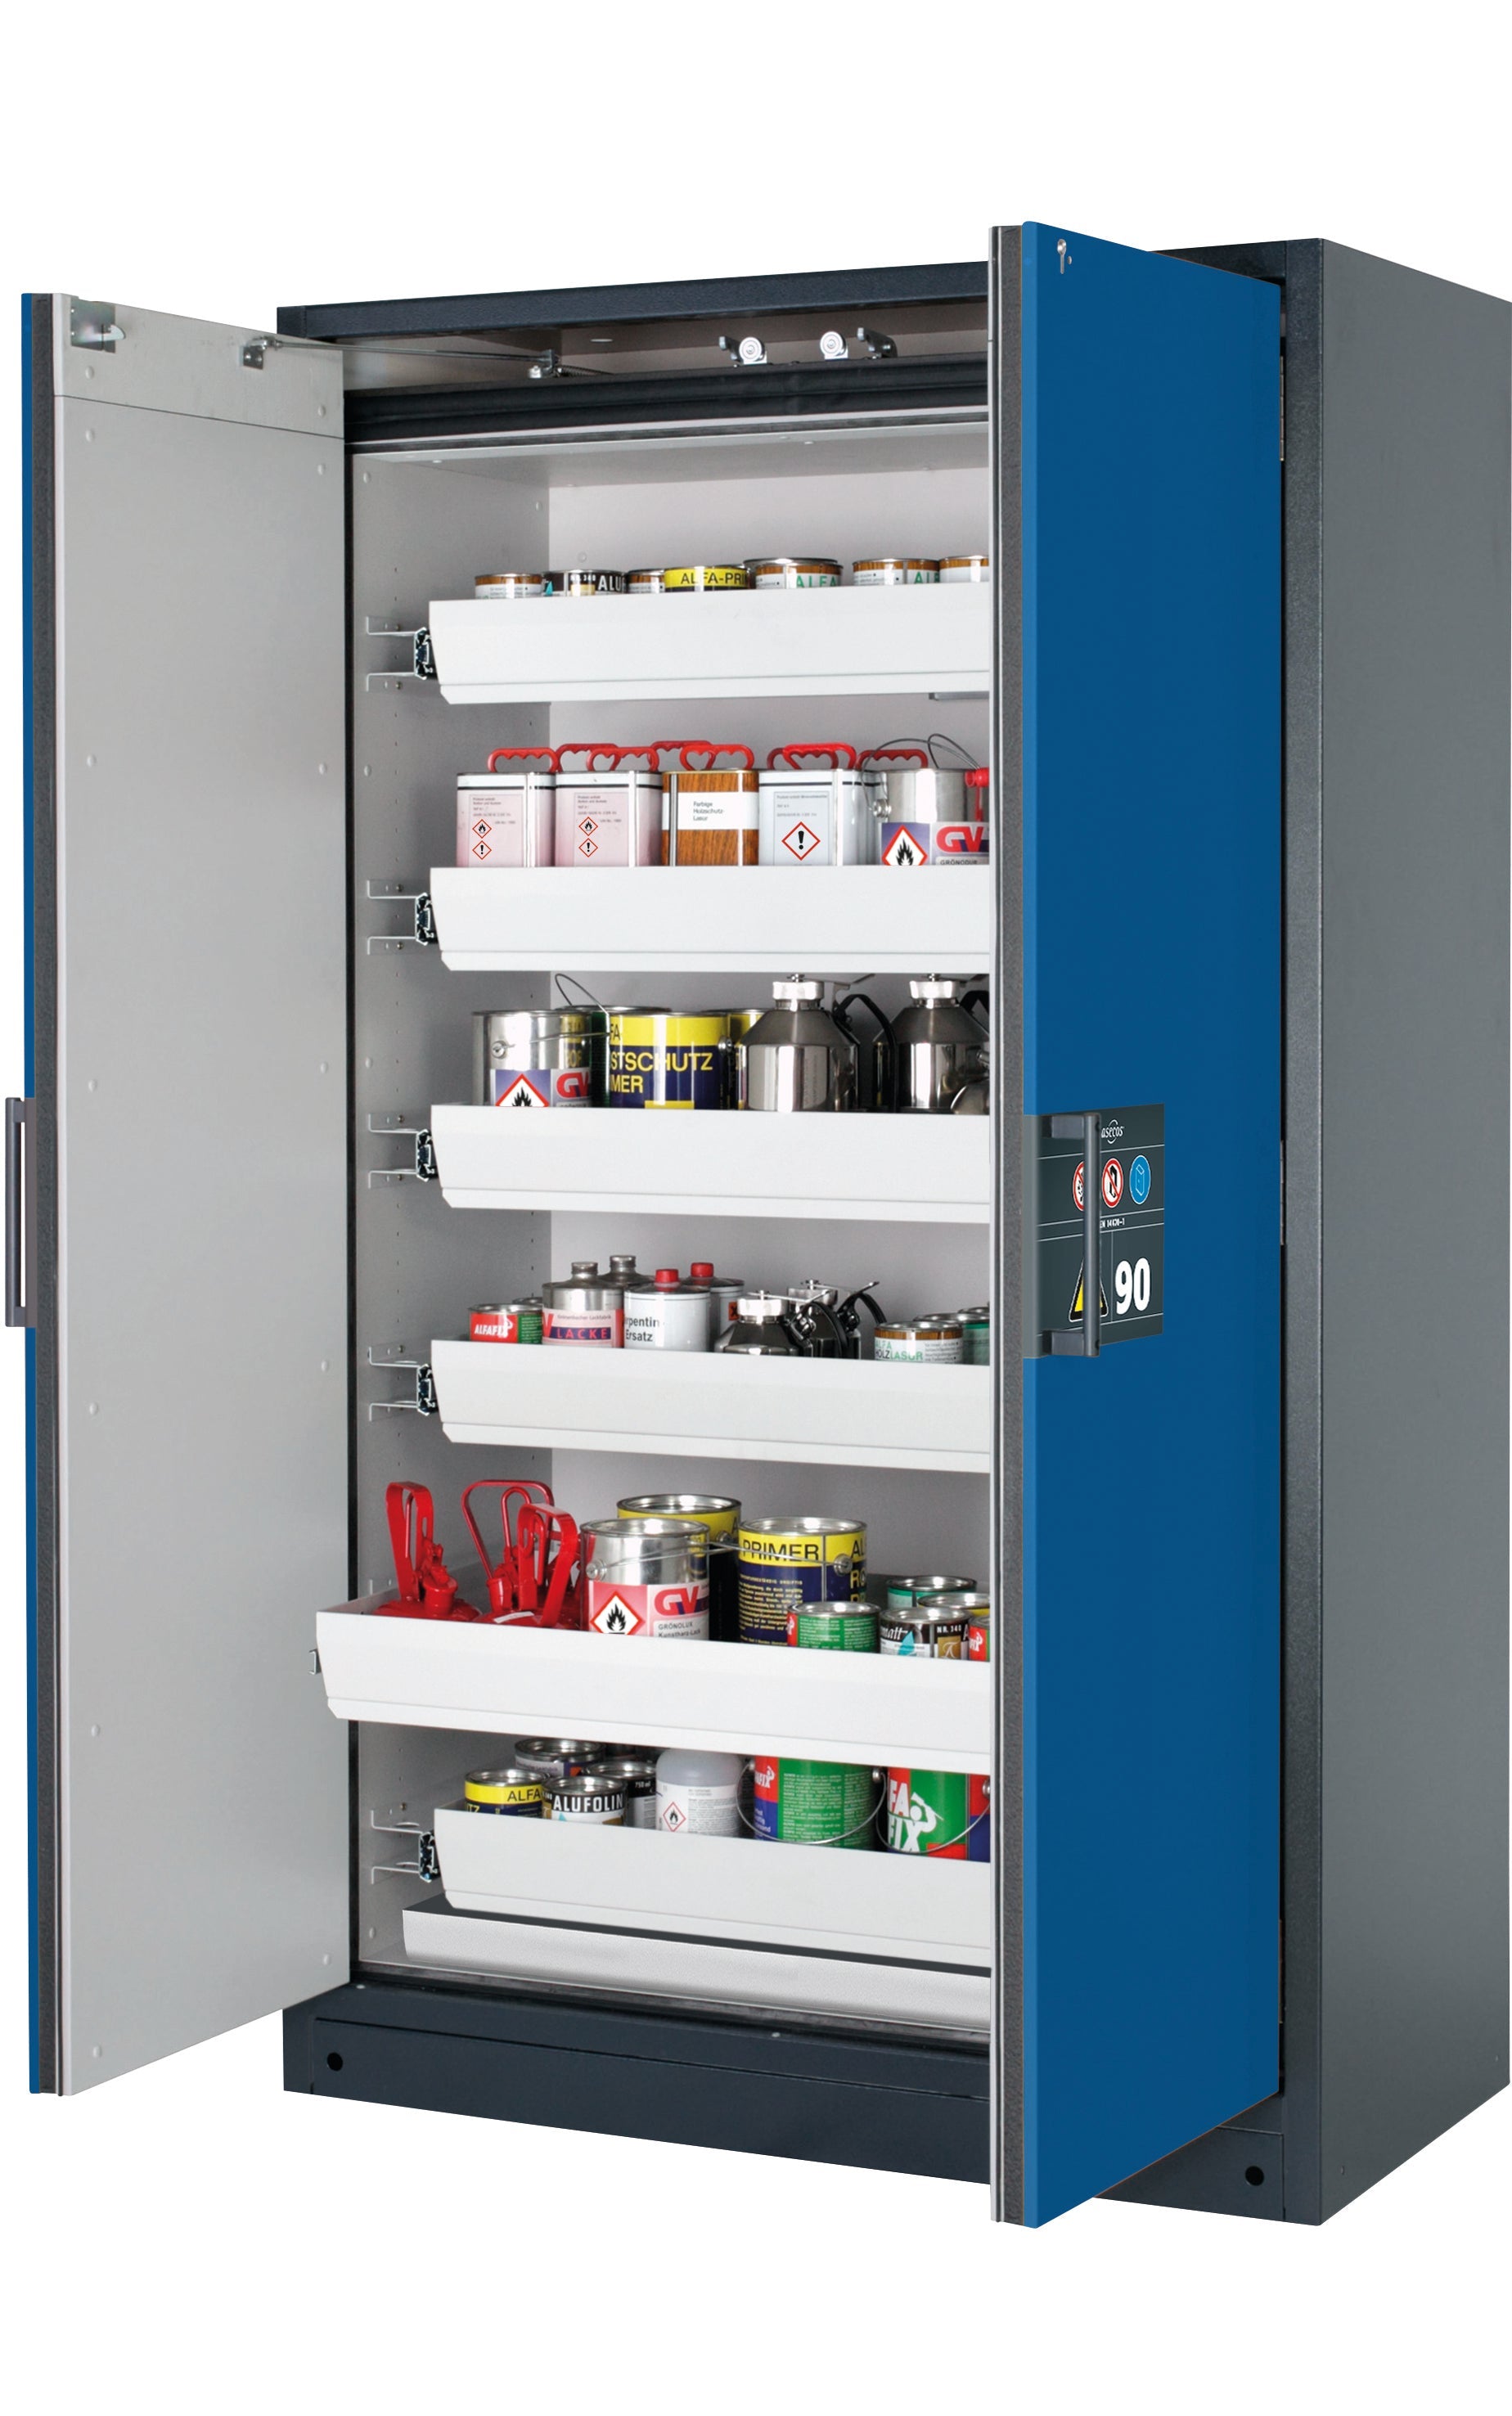 Type 90 safety storage cabinet Q-CLASSIC-90 model Q90.195.120 in gentian blue RAL 5010 with 6x drawer (standard) (sheet steel),